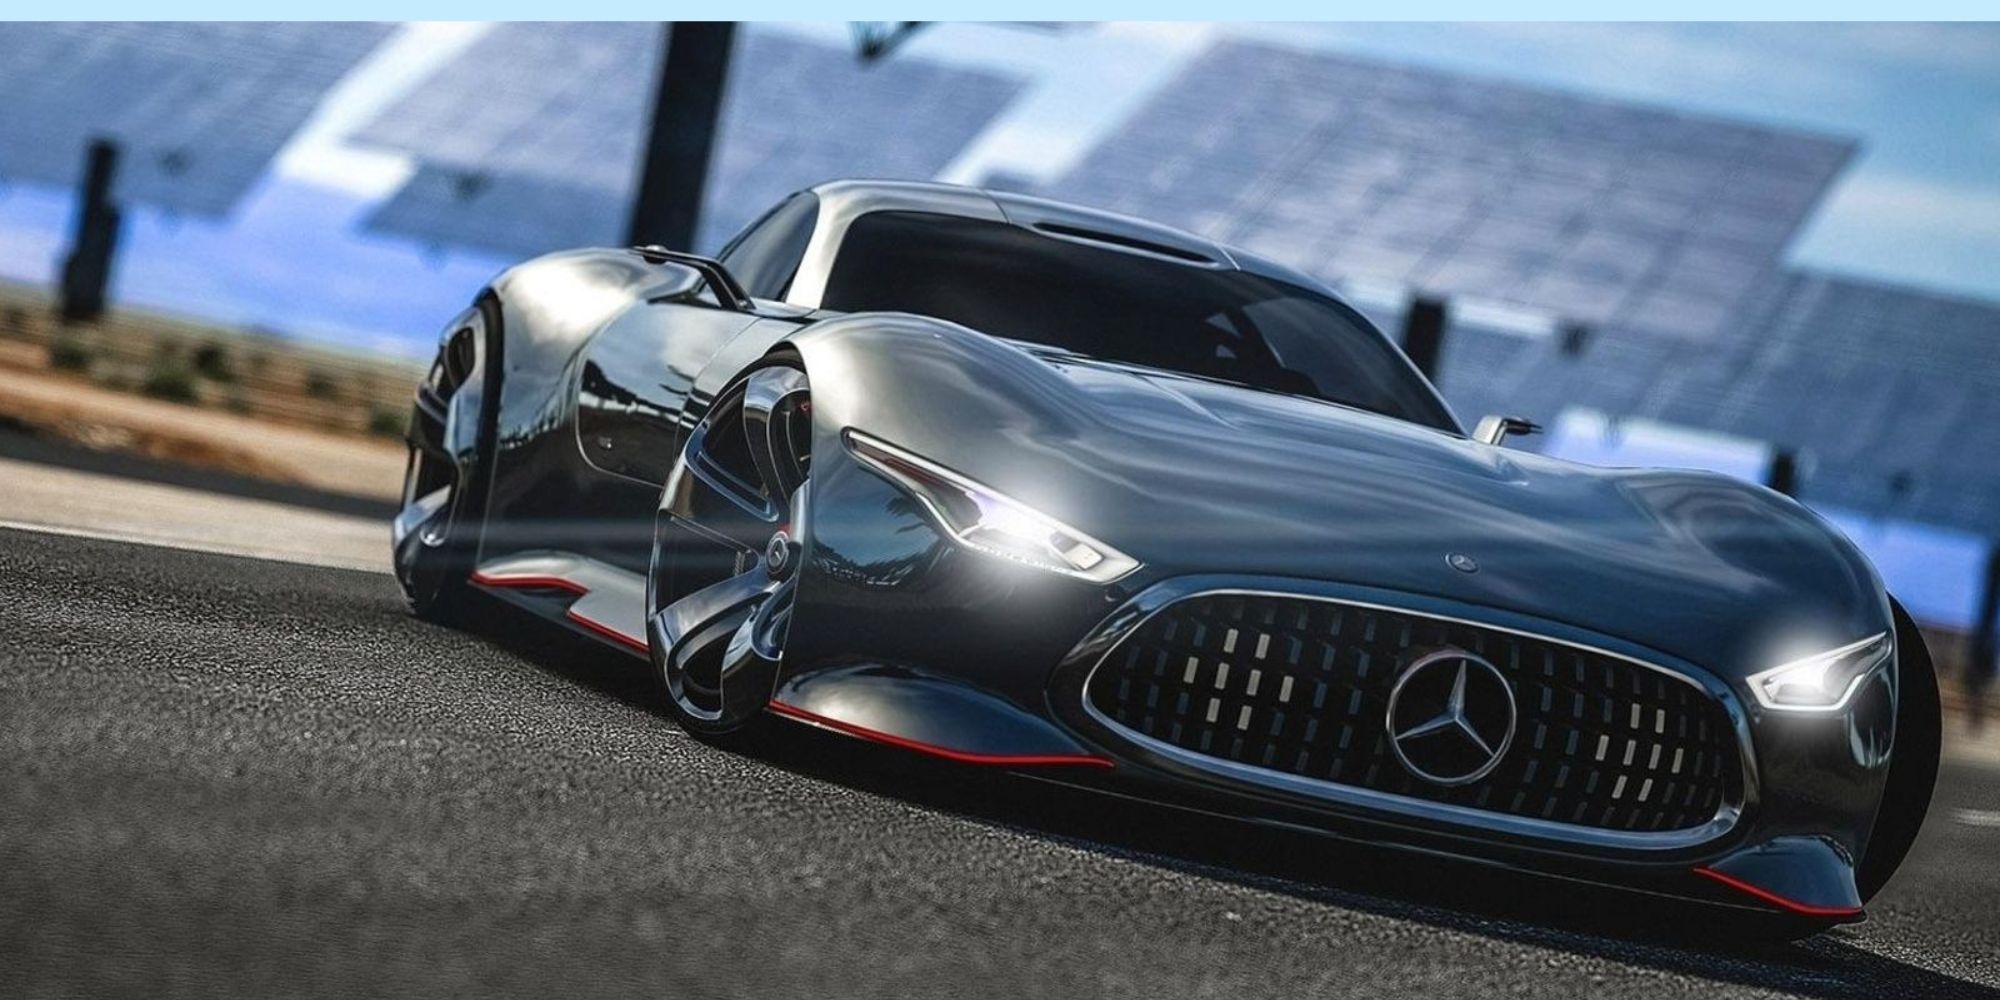 Gran Turismo 7 VR Players Are Complaining About Weird Camera Angles On Some Cars